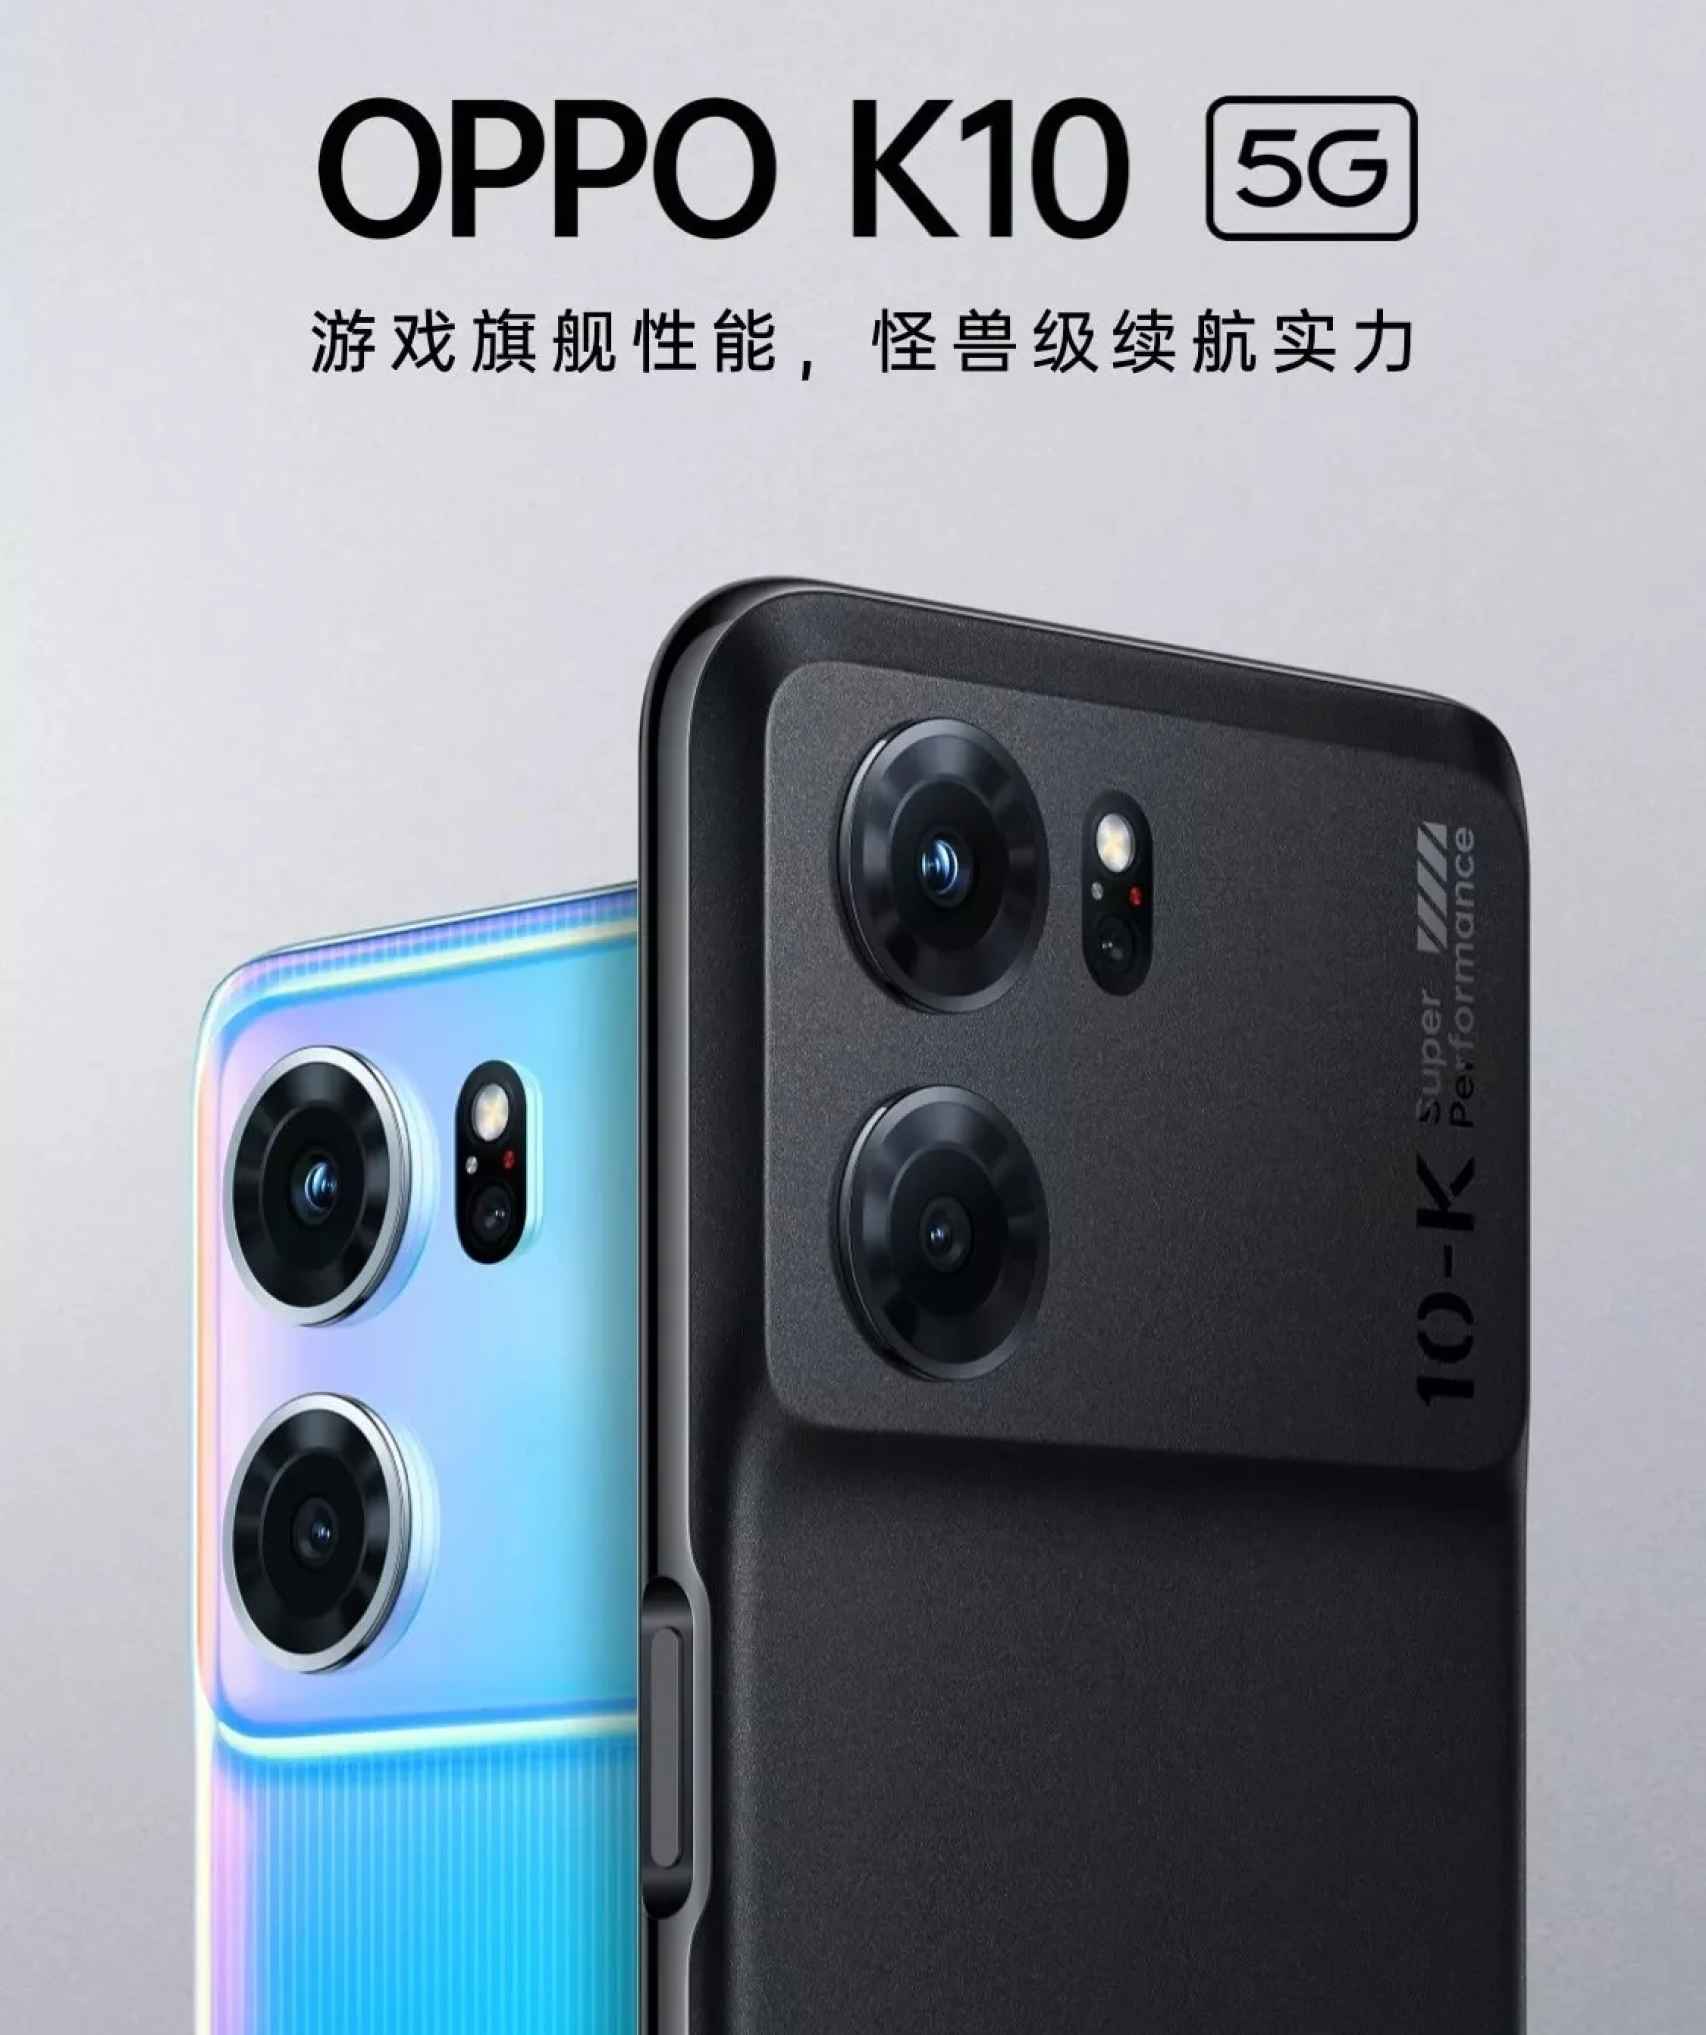 New OPPO K10 Pro and K10 5G: features, prices...